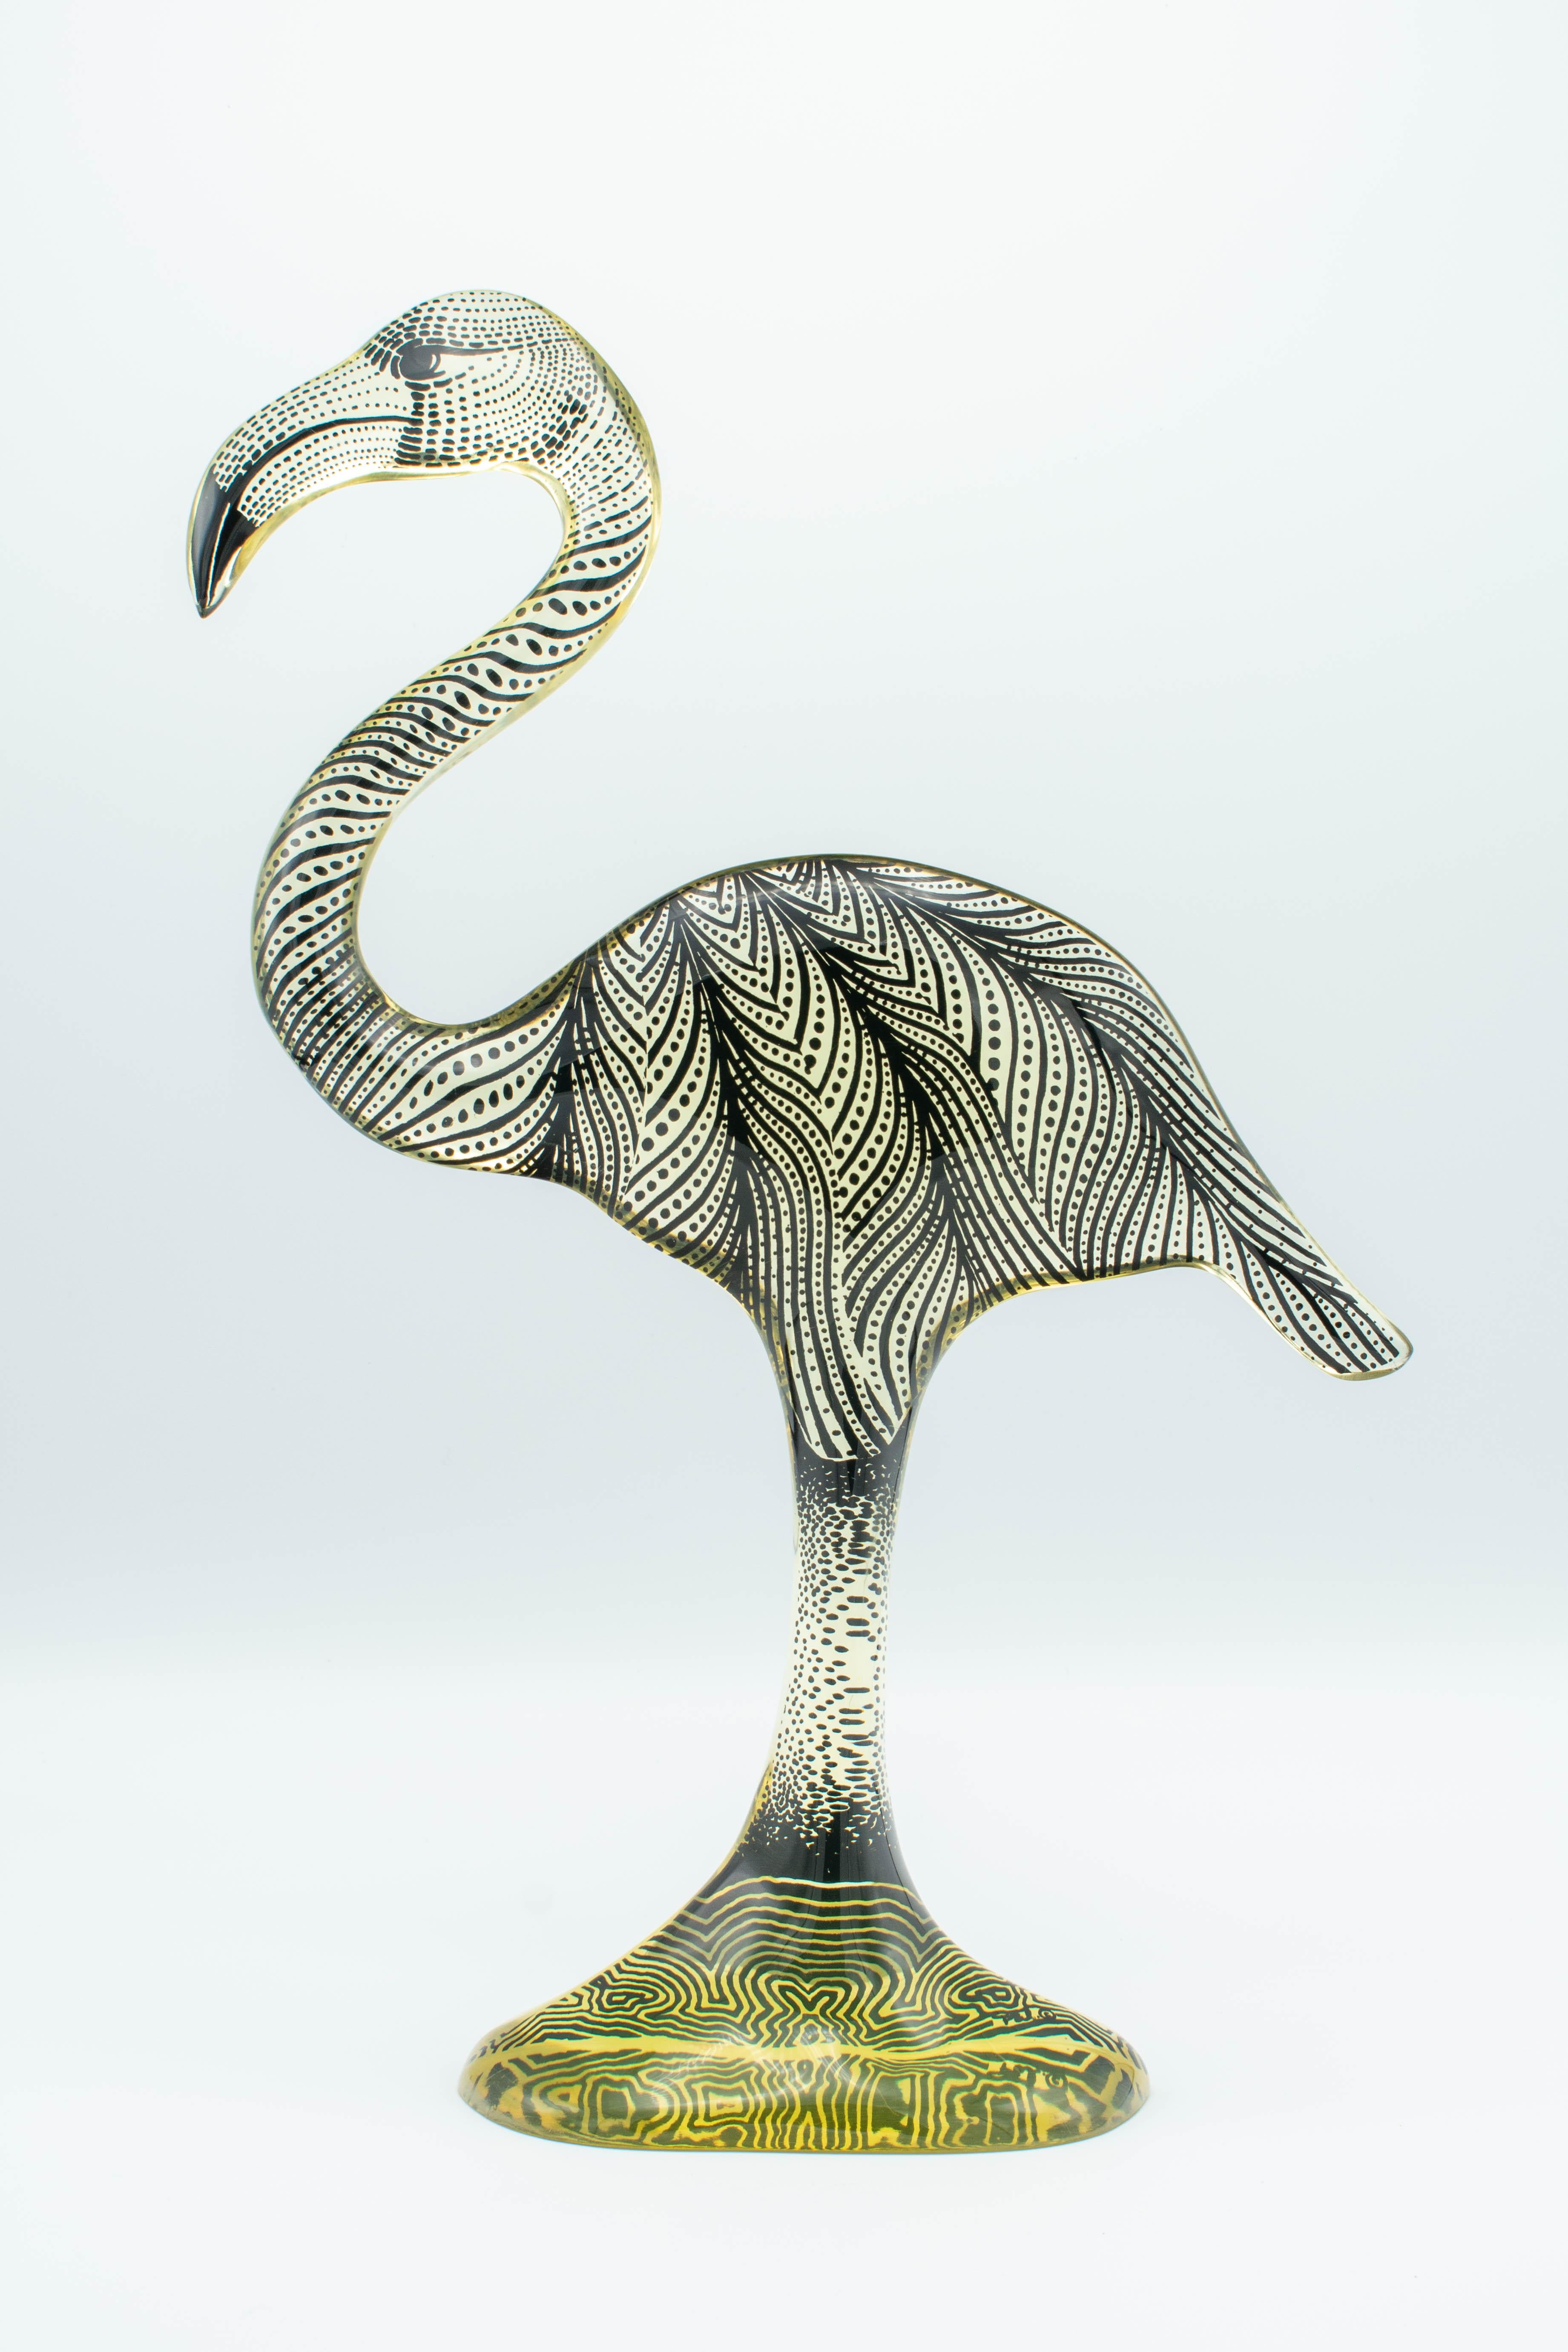 A Mid-Century Modern Lucite Op Art flamingo designed by Abraham Palatnik. Remnant of original label on bottom: Made in Brasil. Abraham Palatnik (born in 1928) is a Brazilian artist and inventor whose innovations include kinechromatic art. Part of